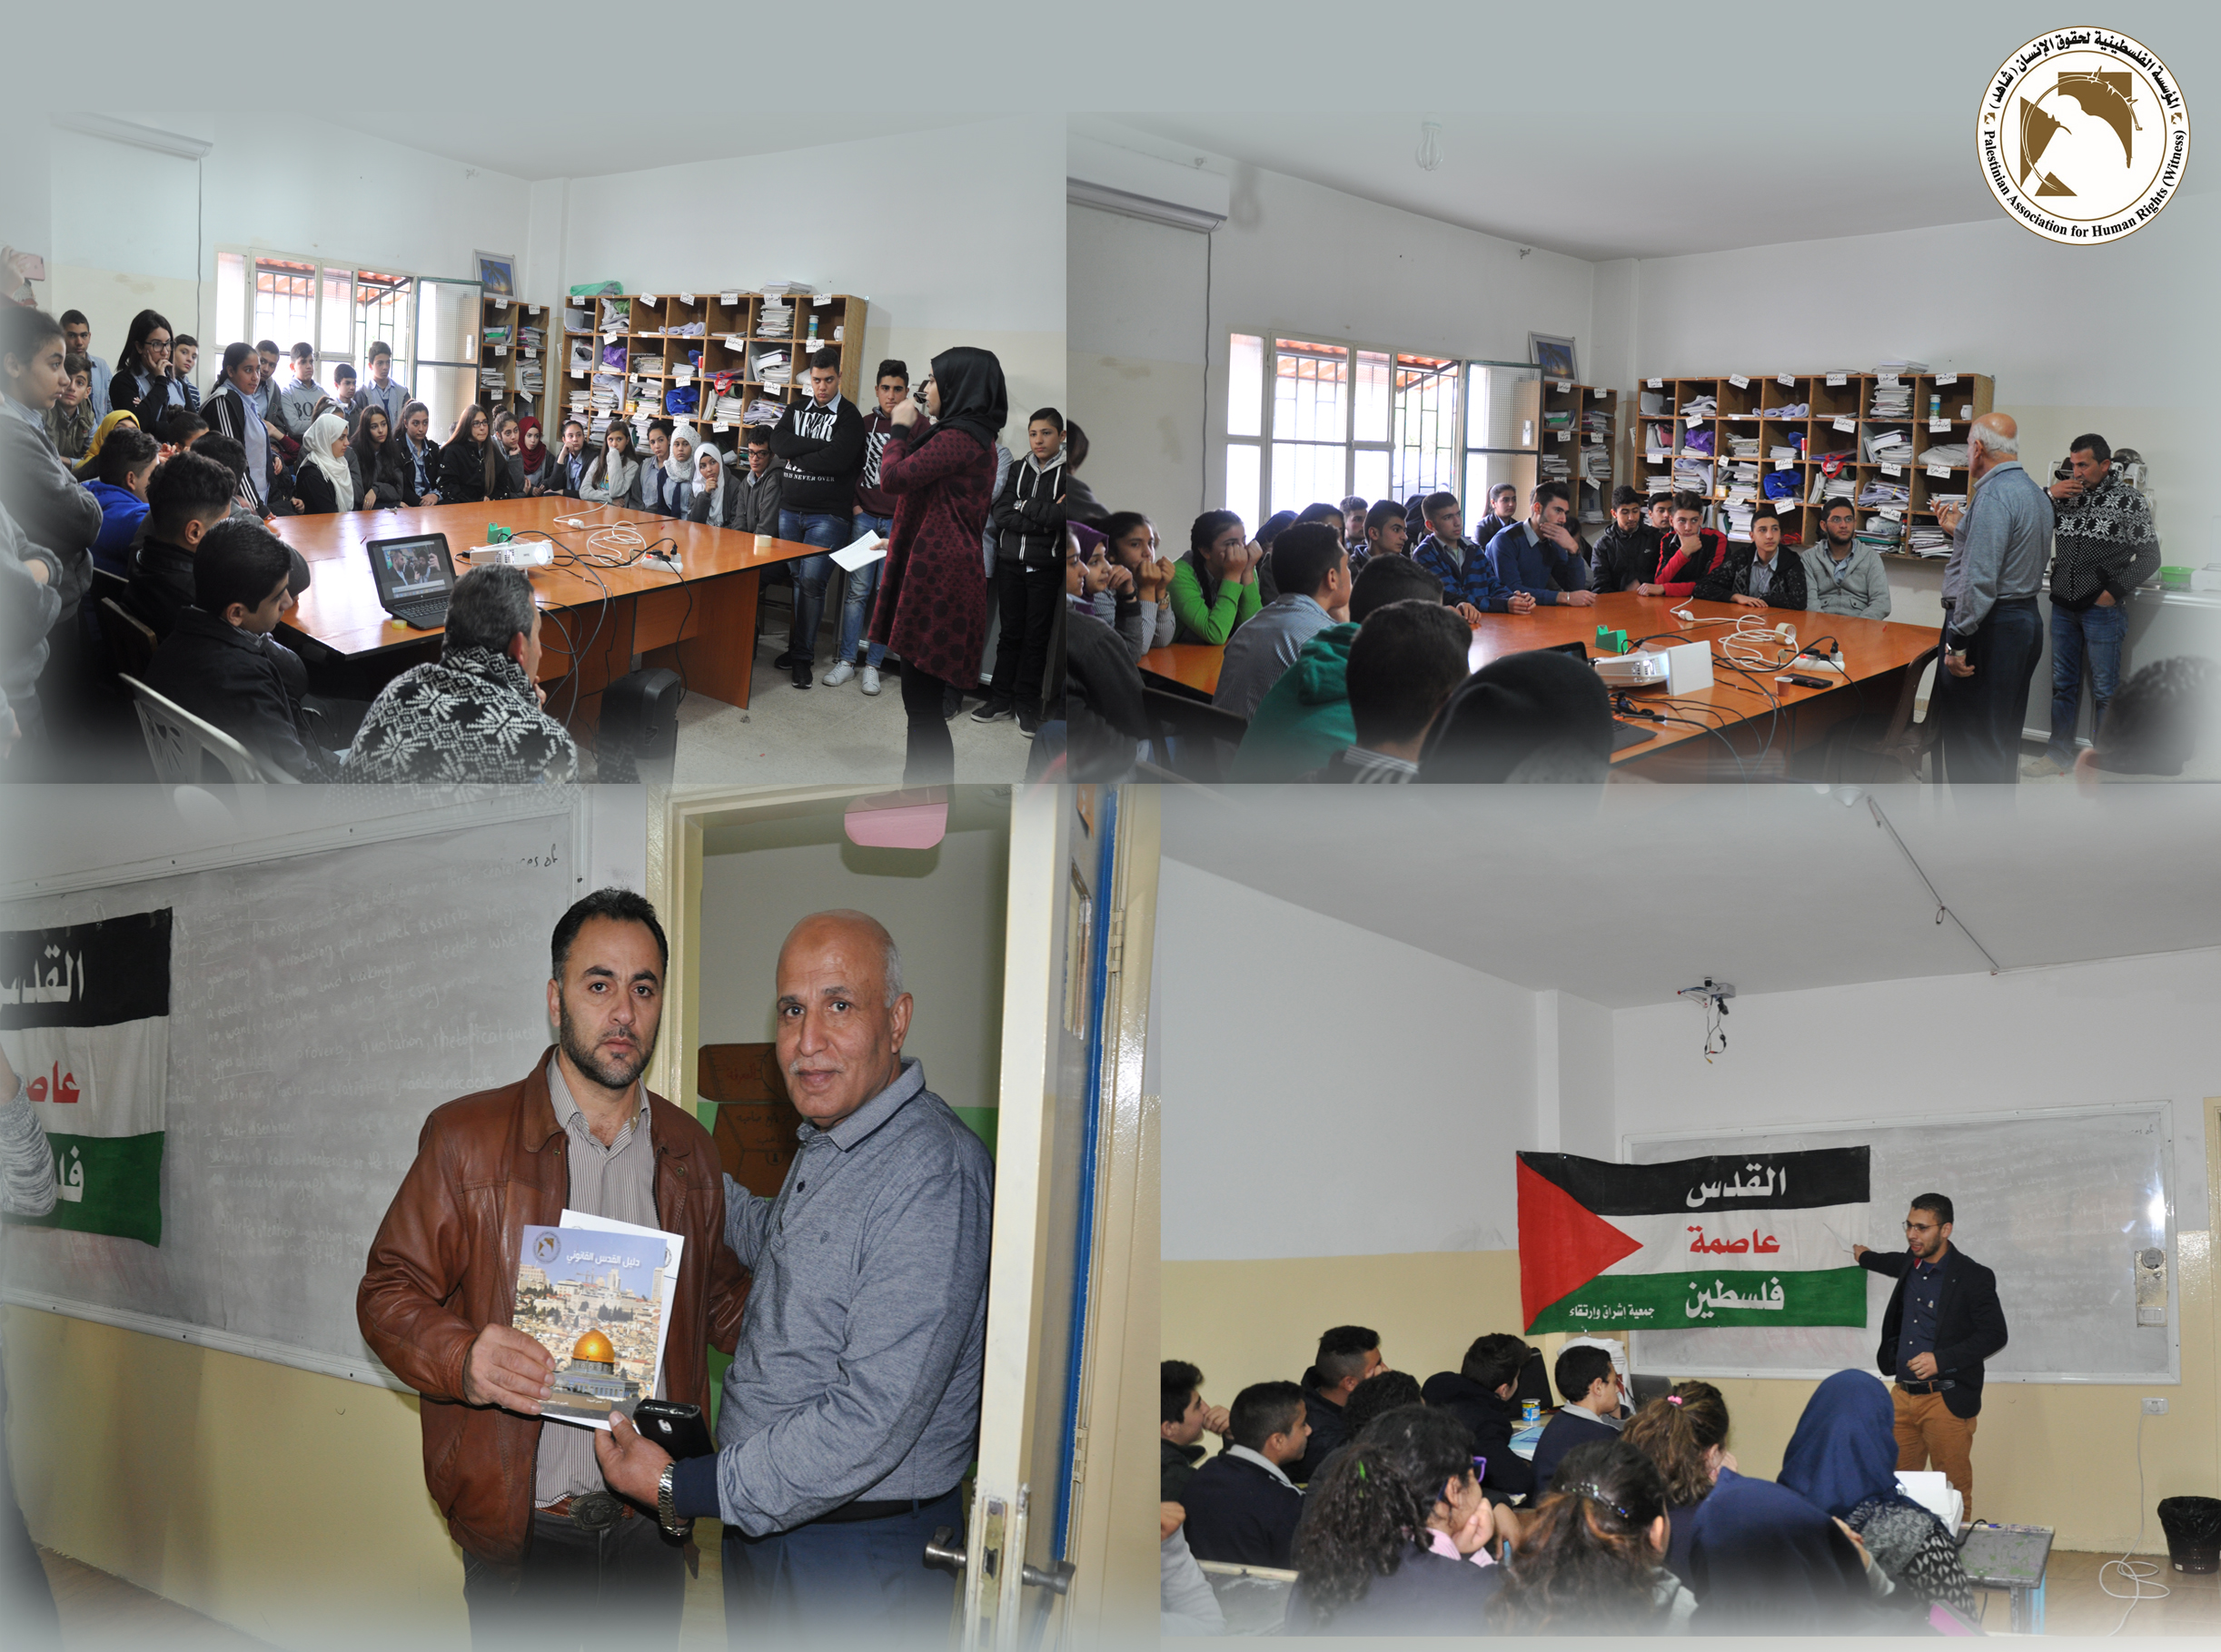 lectured about the legal situation of Jerusalem